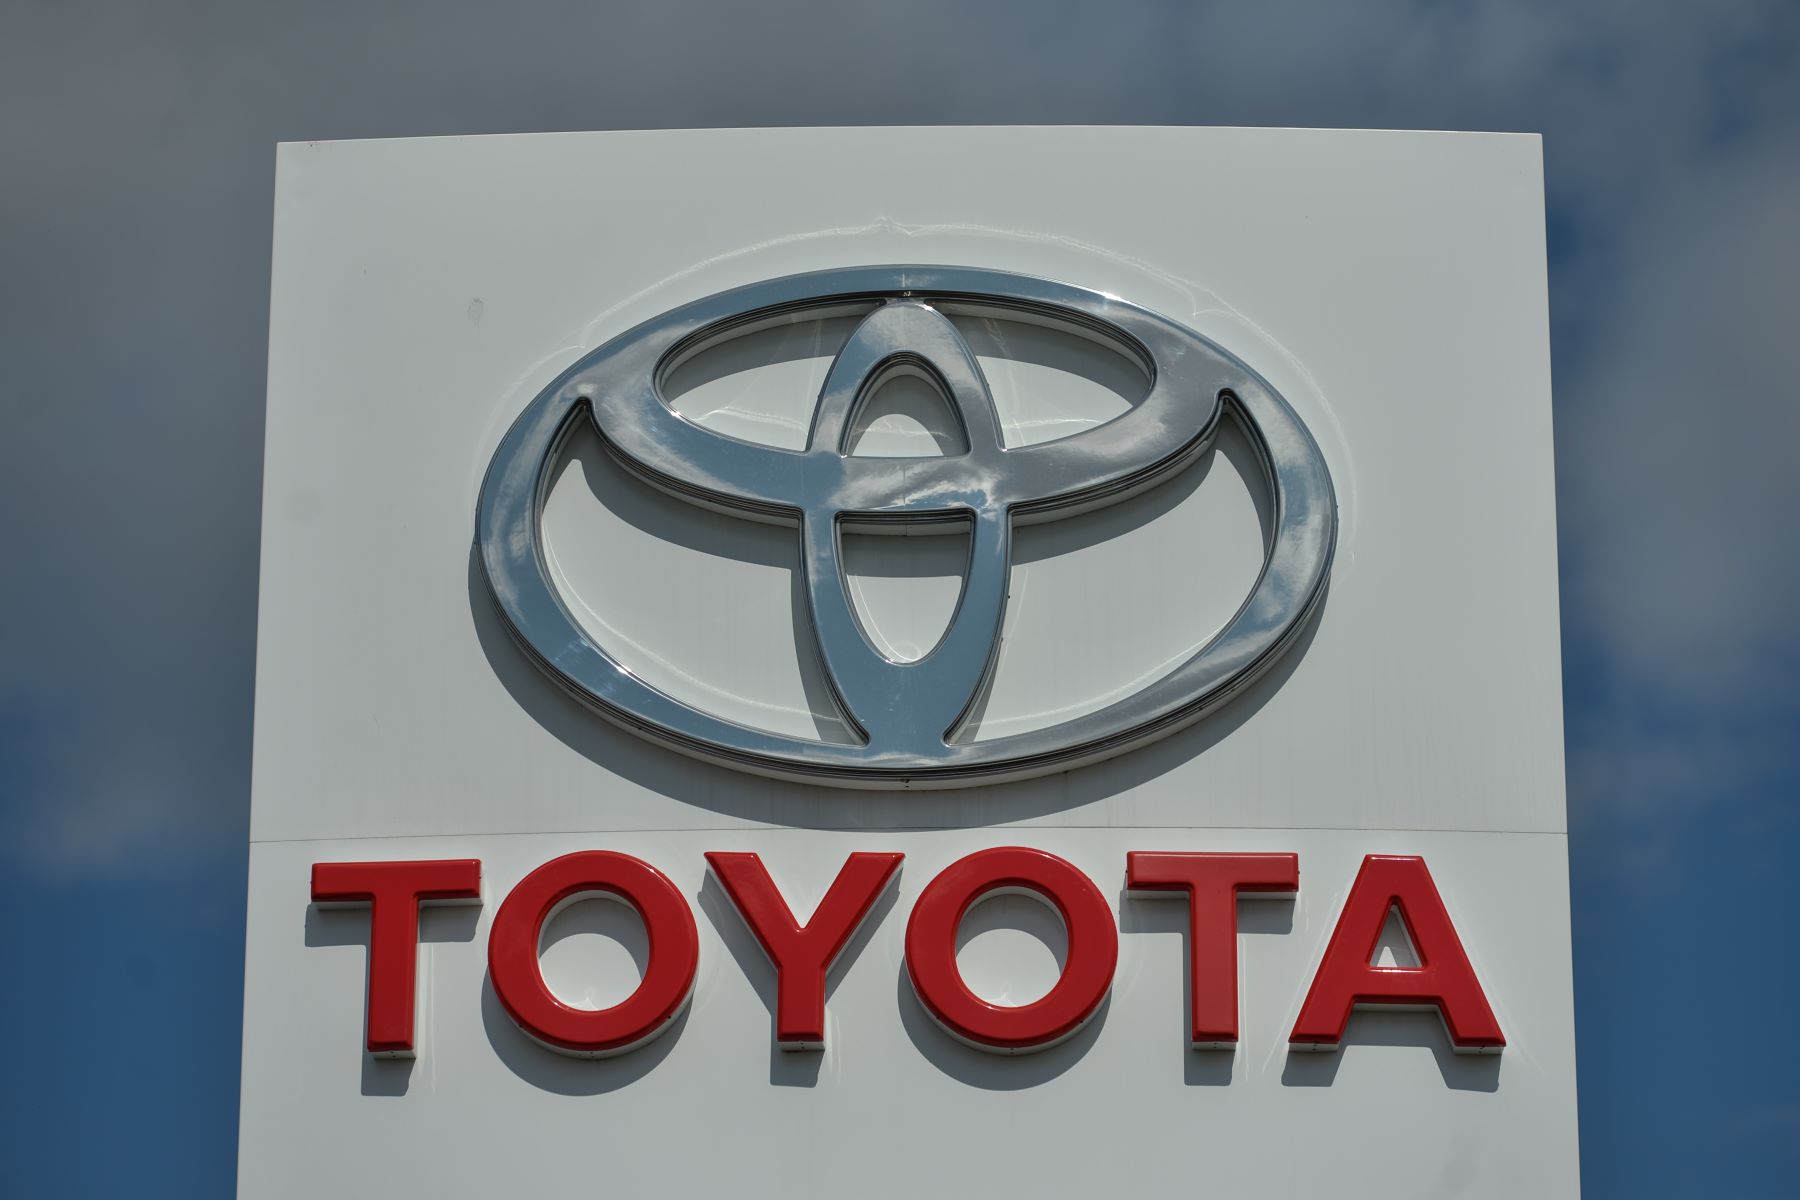 The Toyota logo on a dealership sign in South Edmonton, Alberta, Canada